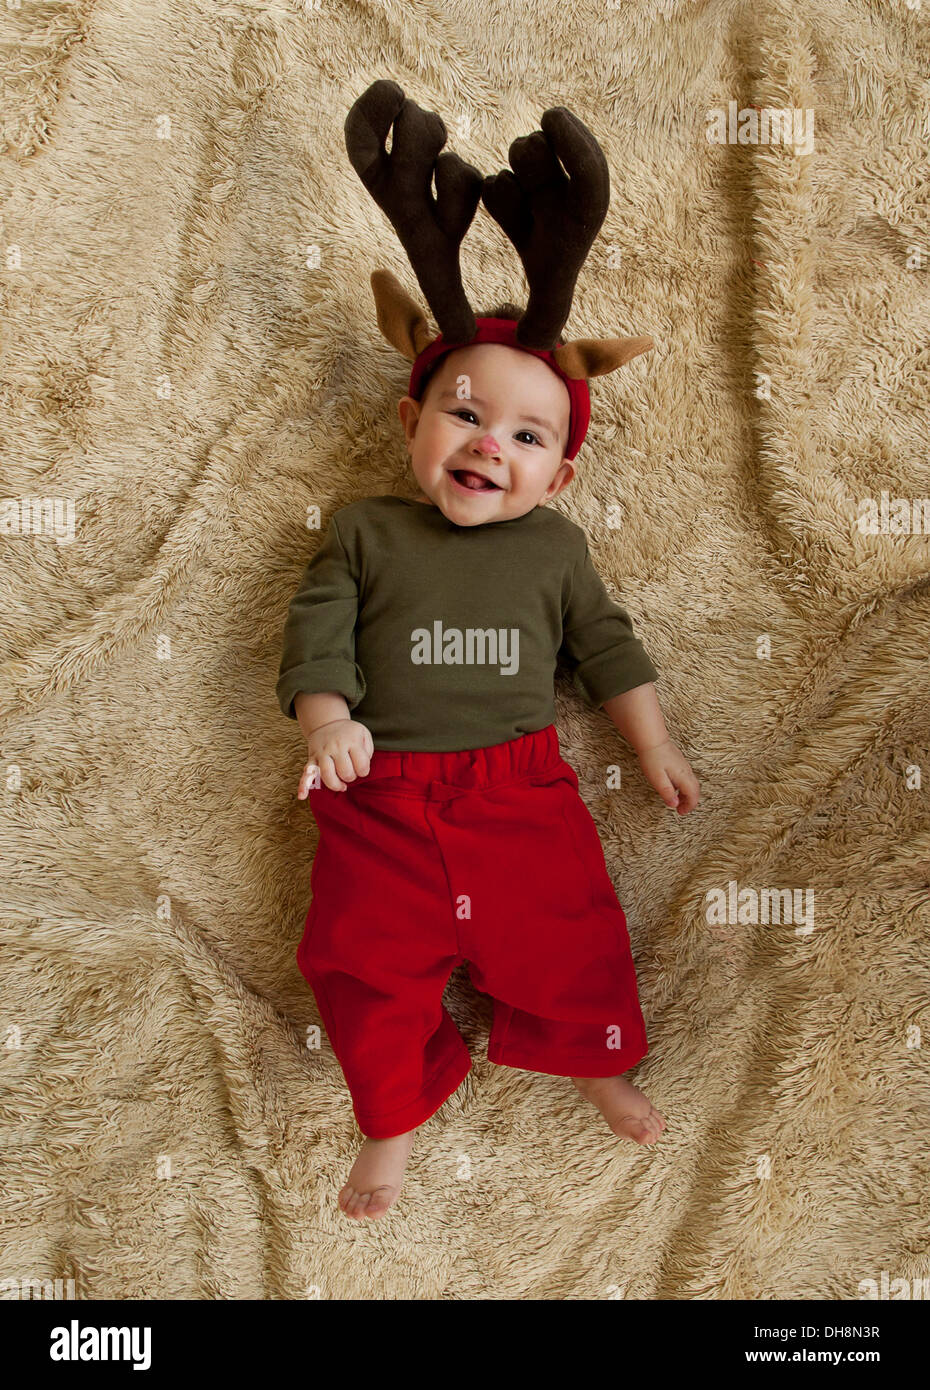 Baby Christmas Outfit Stock Photo - Alamy